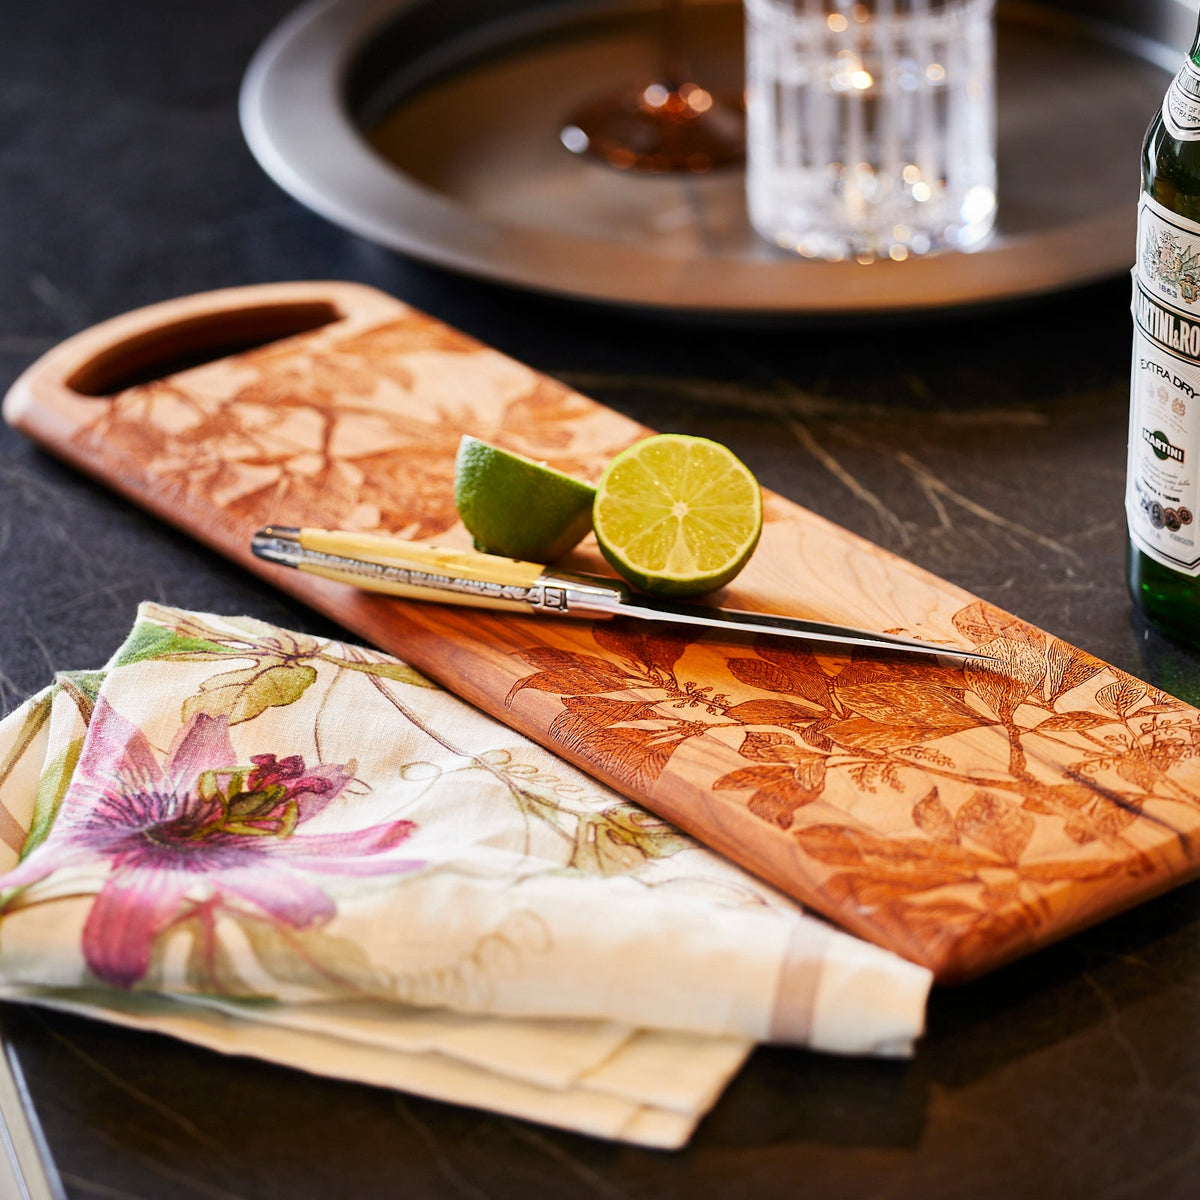 A Passionflower Linen Kitchen Towels Set/2, manufactured by TTT, decorated with a lime and accompanied by a bottle of wine.